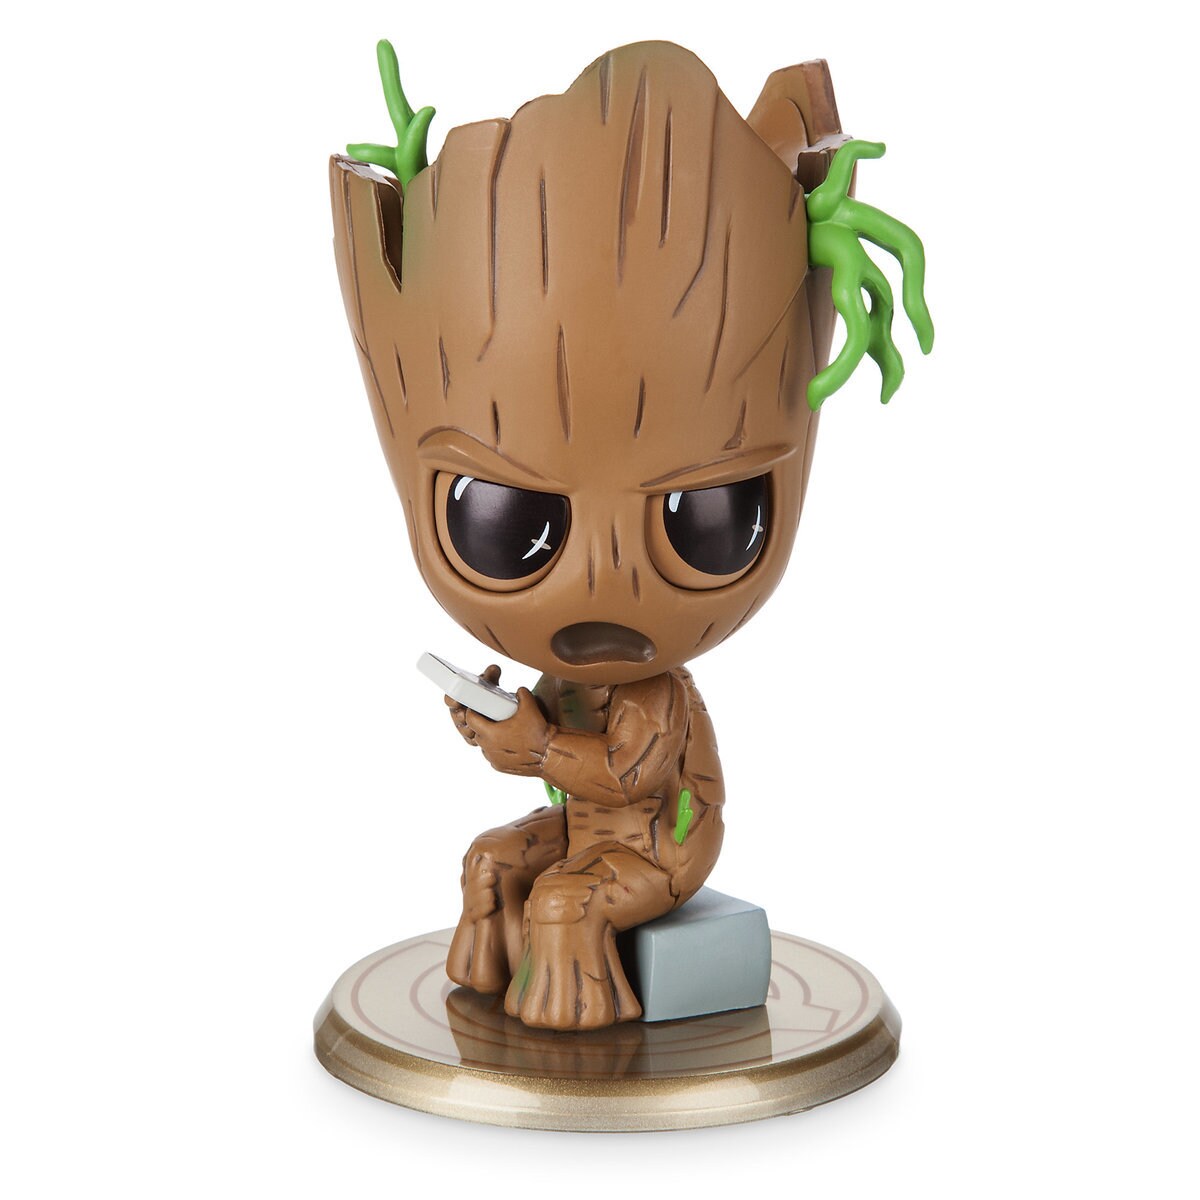 Product Image of Groot Cosbaby Bobble-Head Figure by Hot Toys - Marvel's Avengers: Infinity War # 1